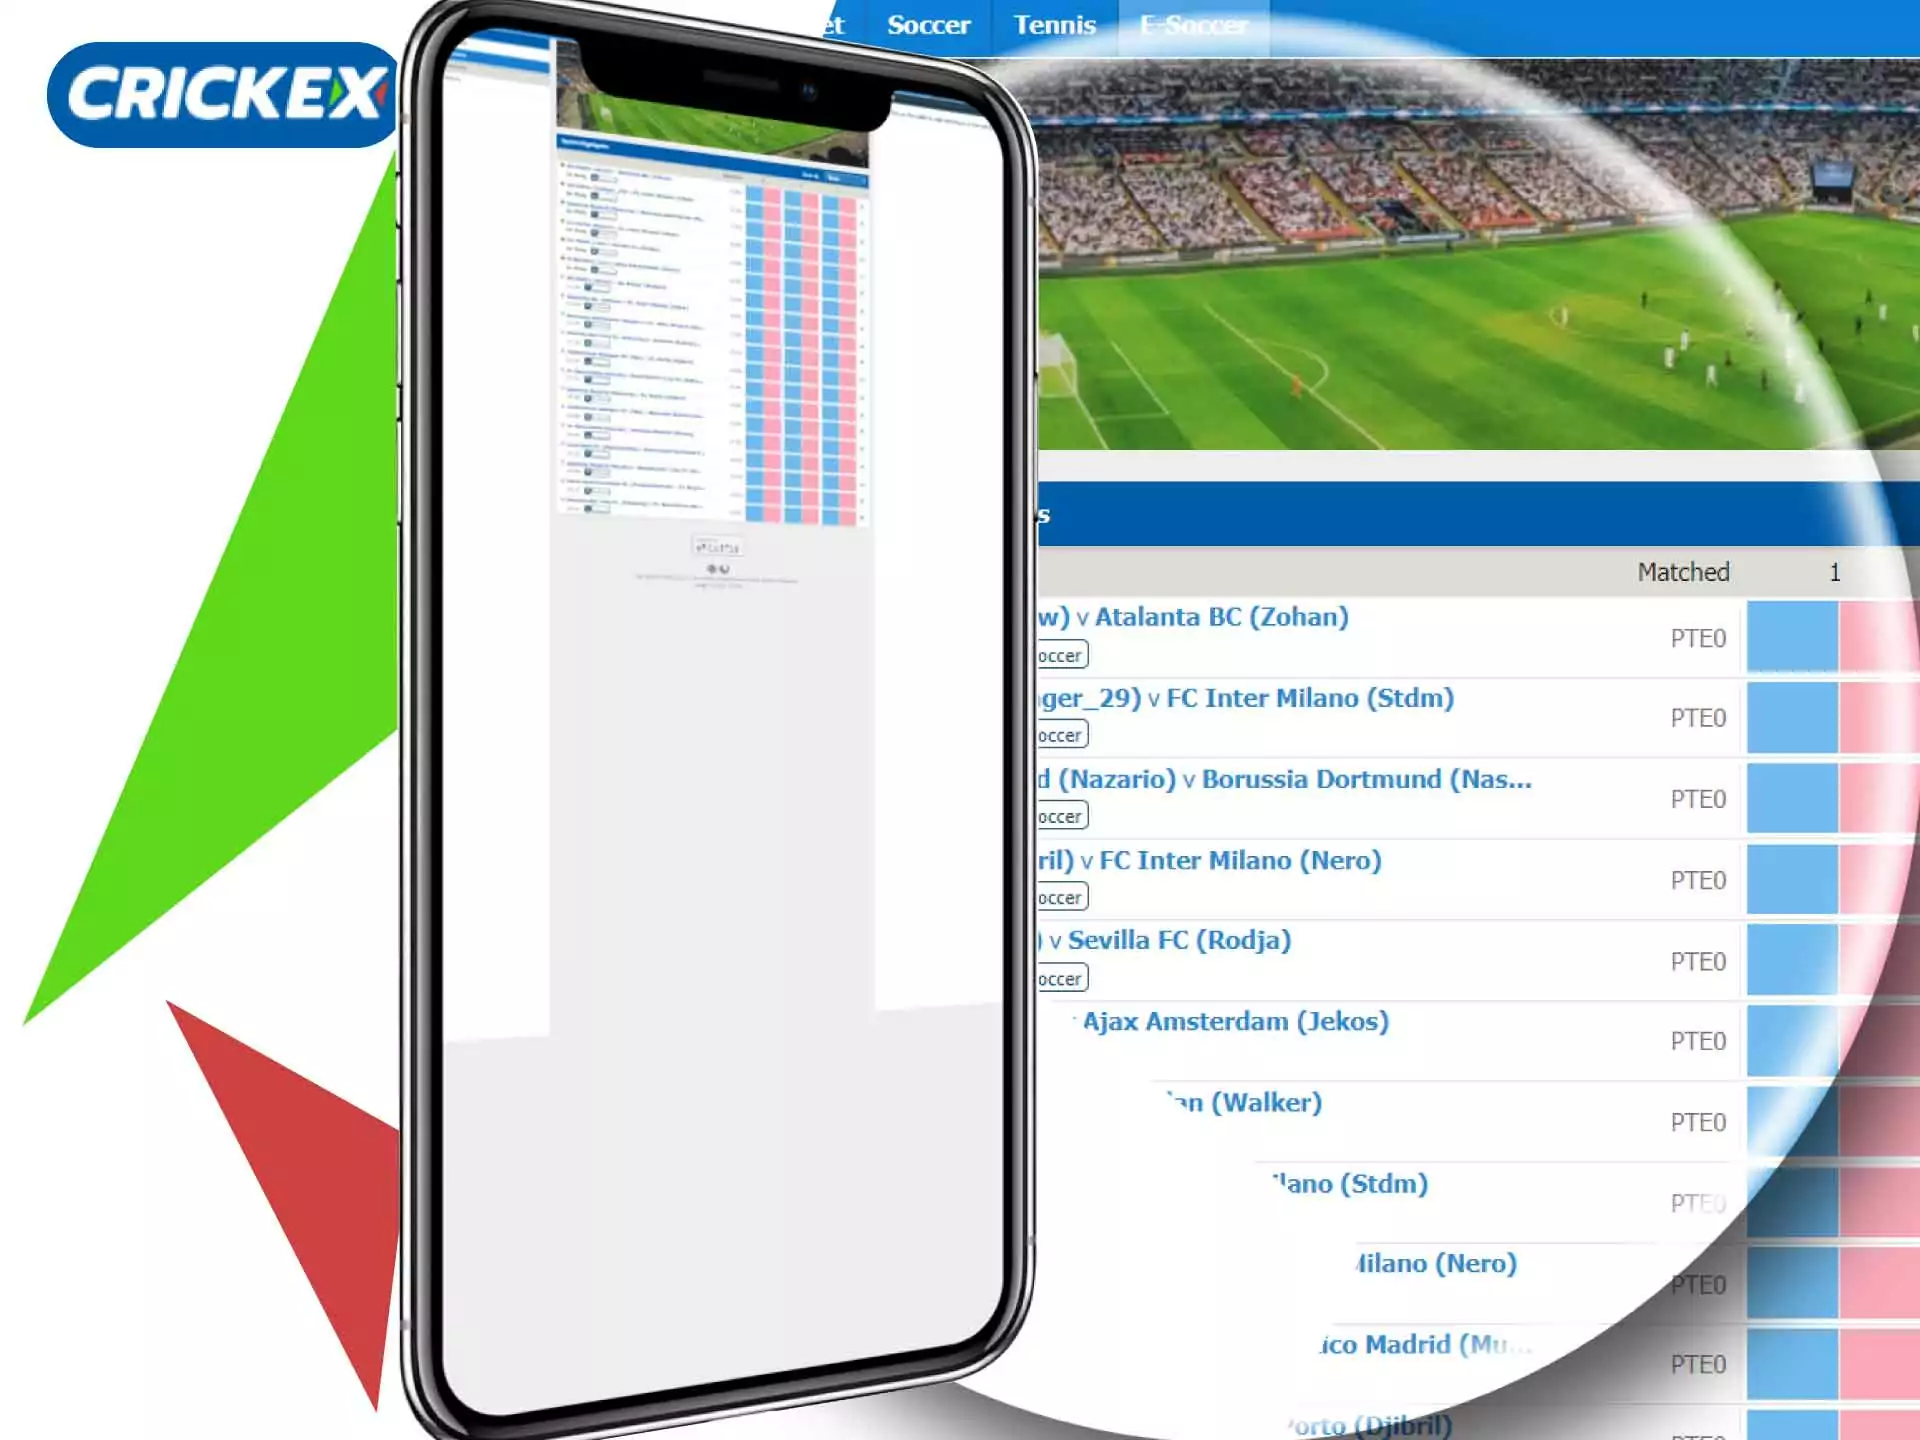 There are also esports opportunities for betting in the Crickex app.